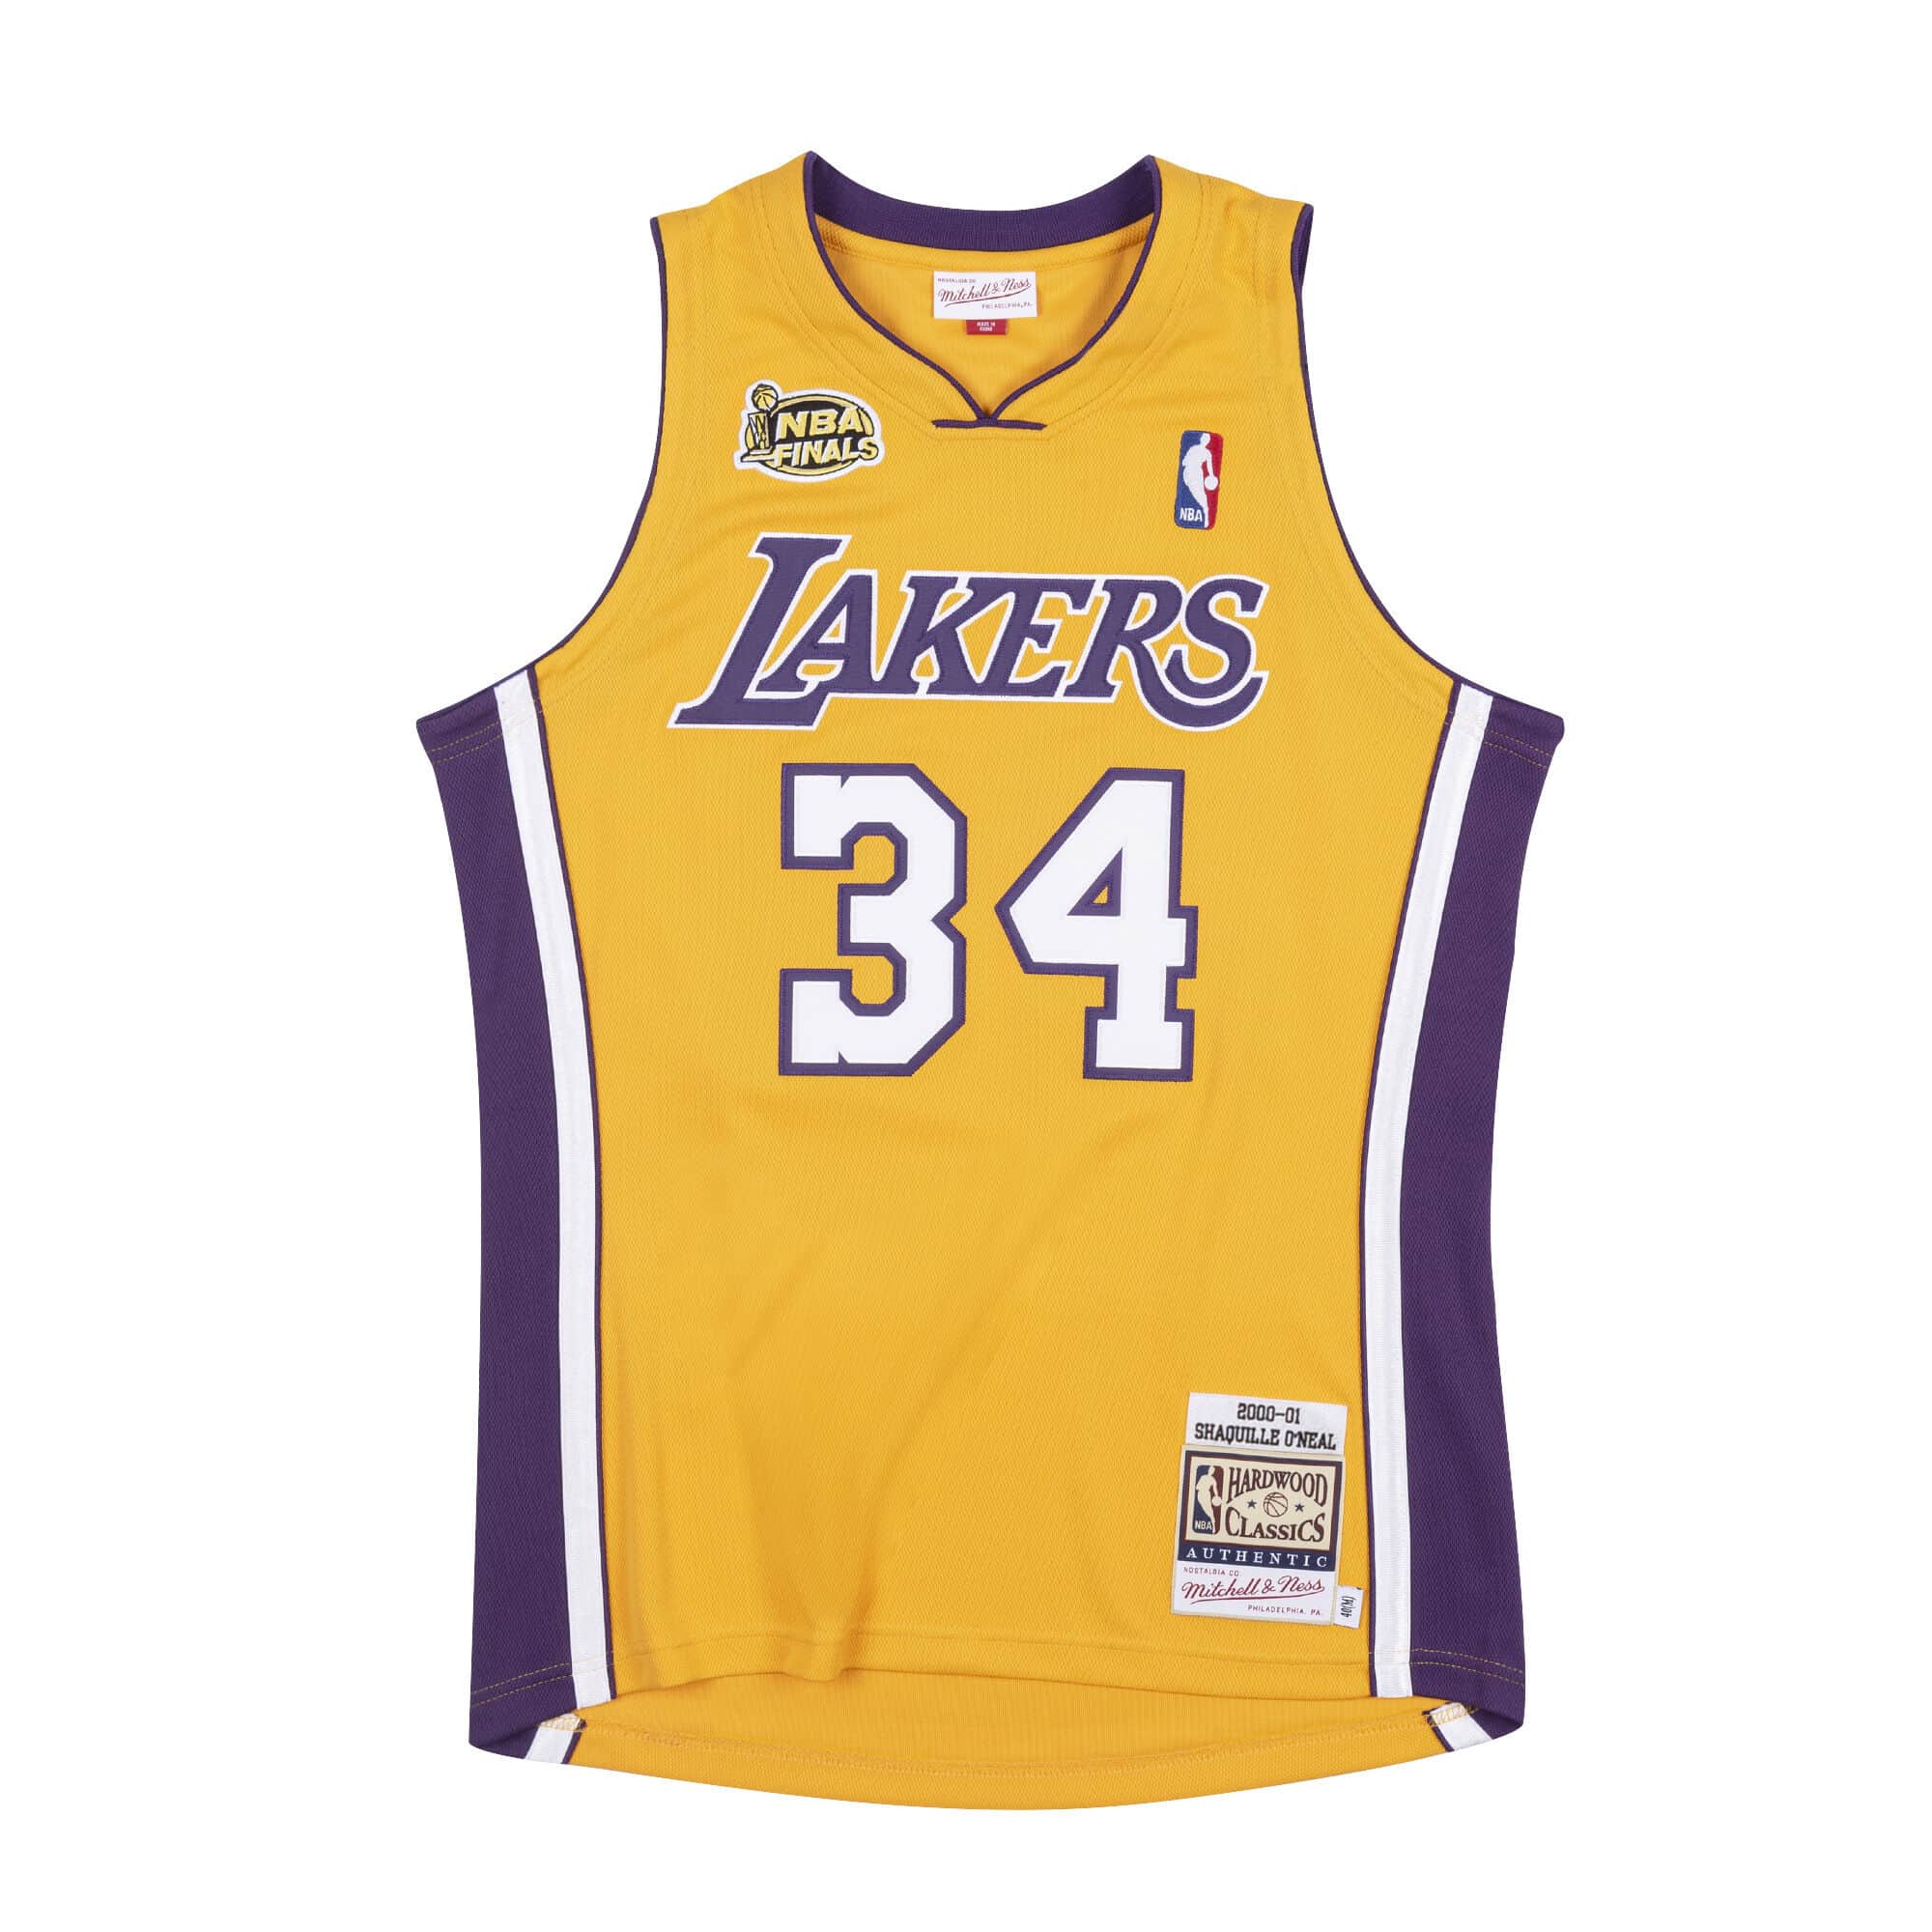 Shaquille O'Neal Los Angeles Lakers 2000-01 Jersey